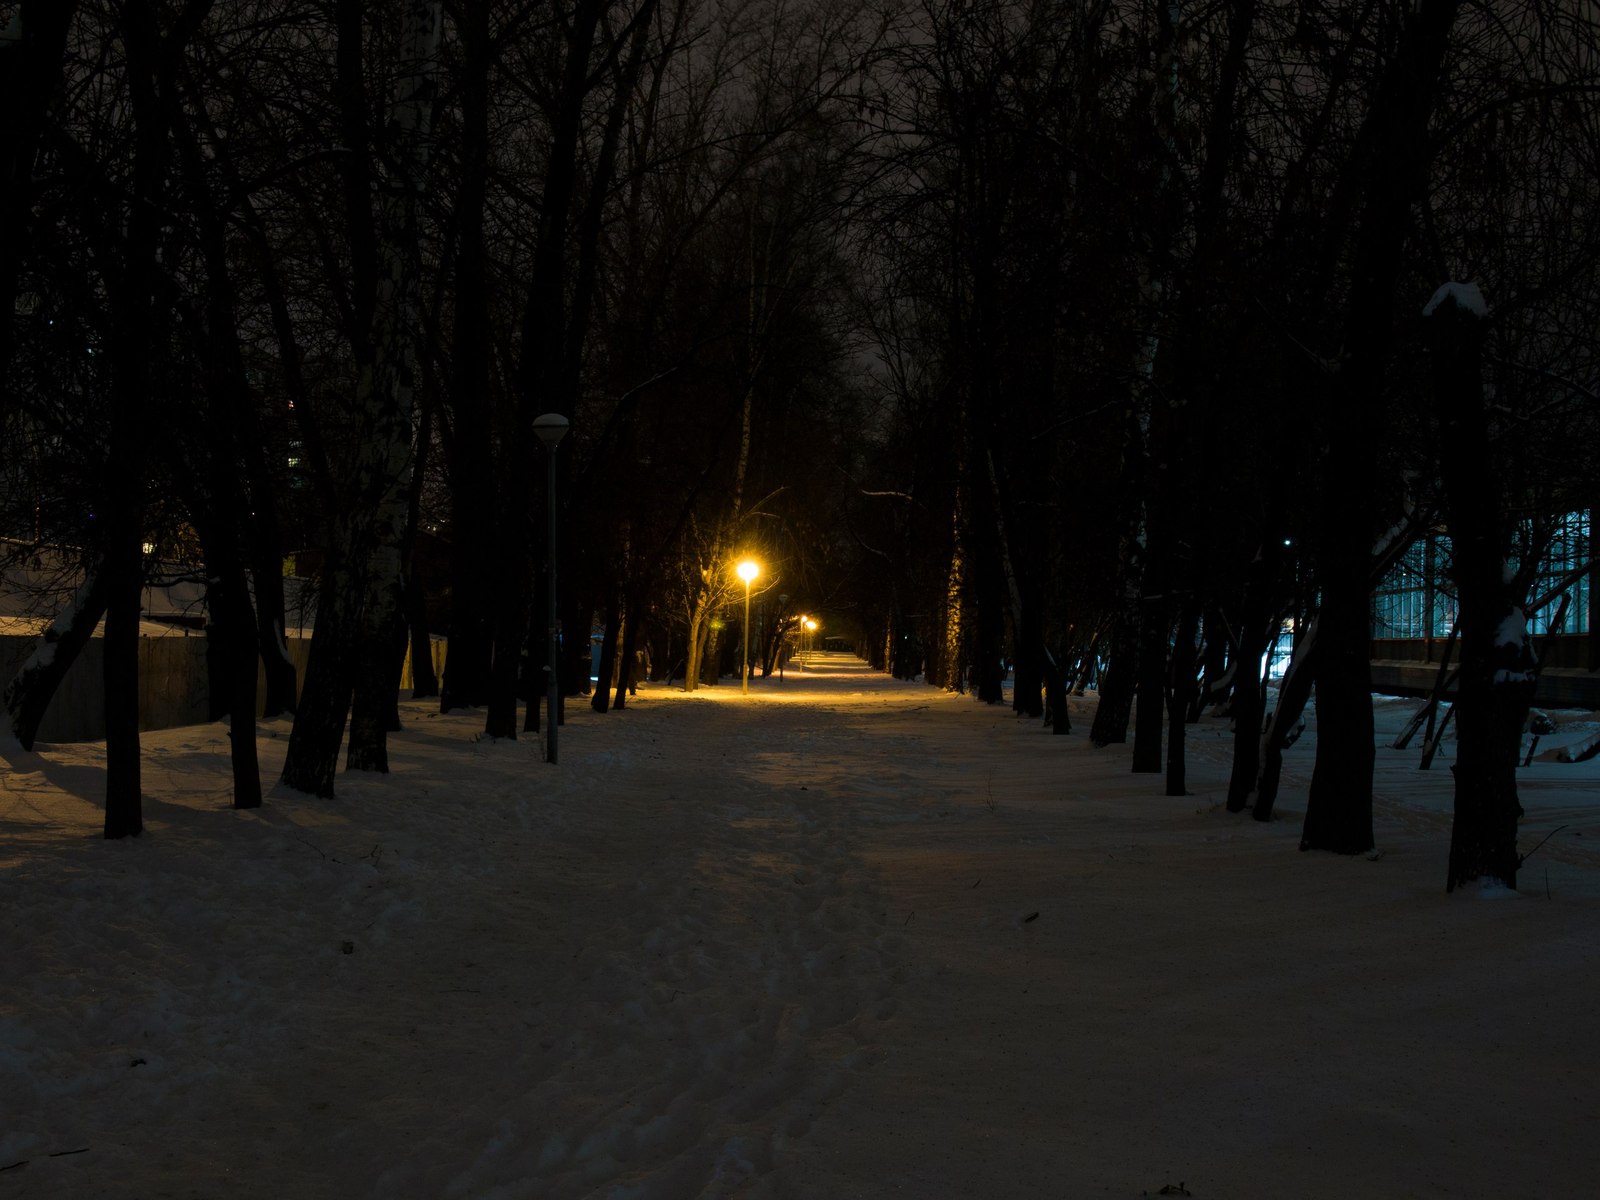 A bit of winter atmosphere - I want criticism, Olympus, The park, Winter, My